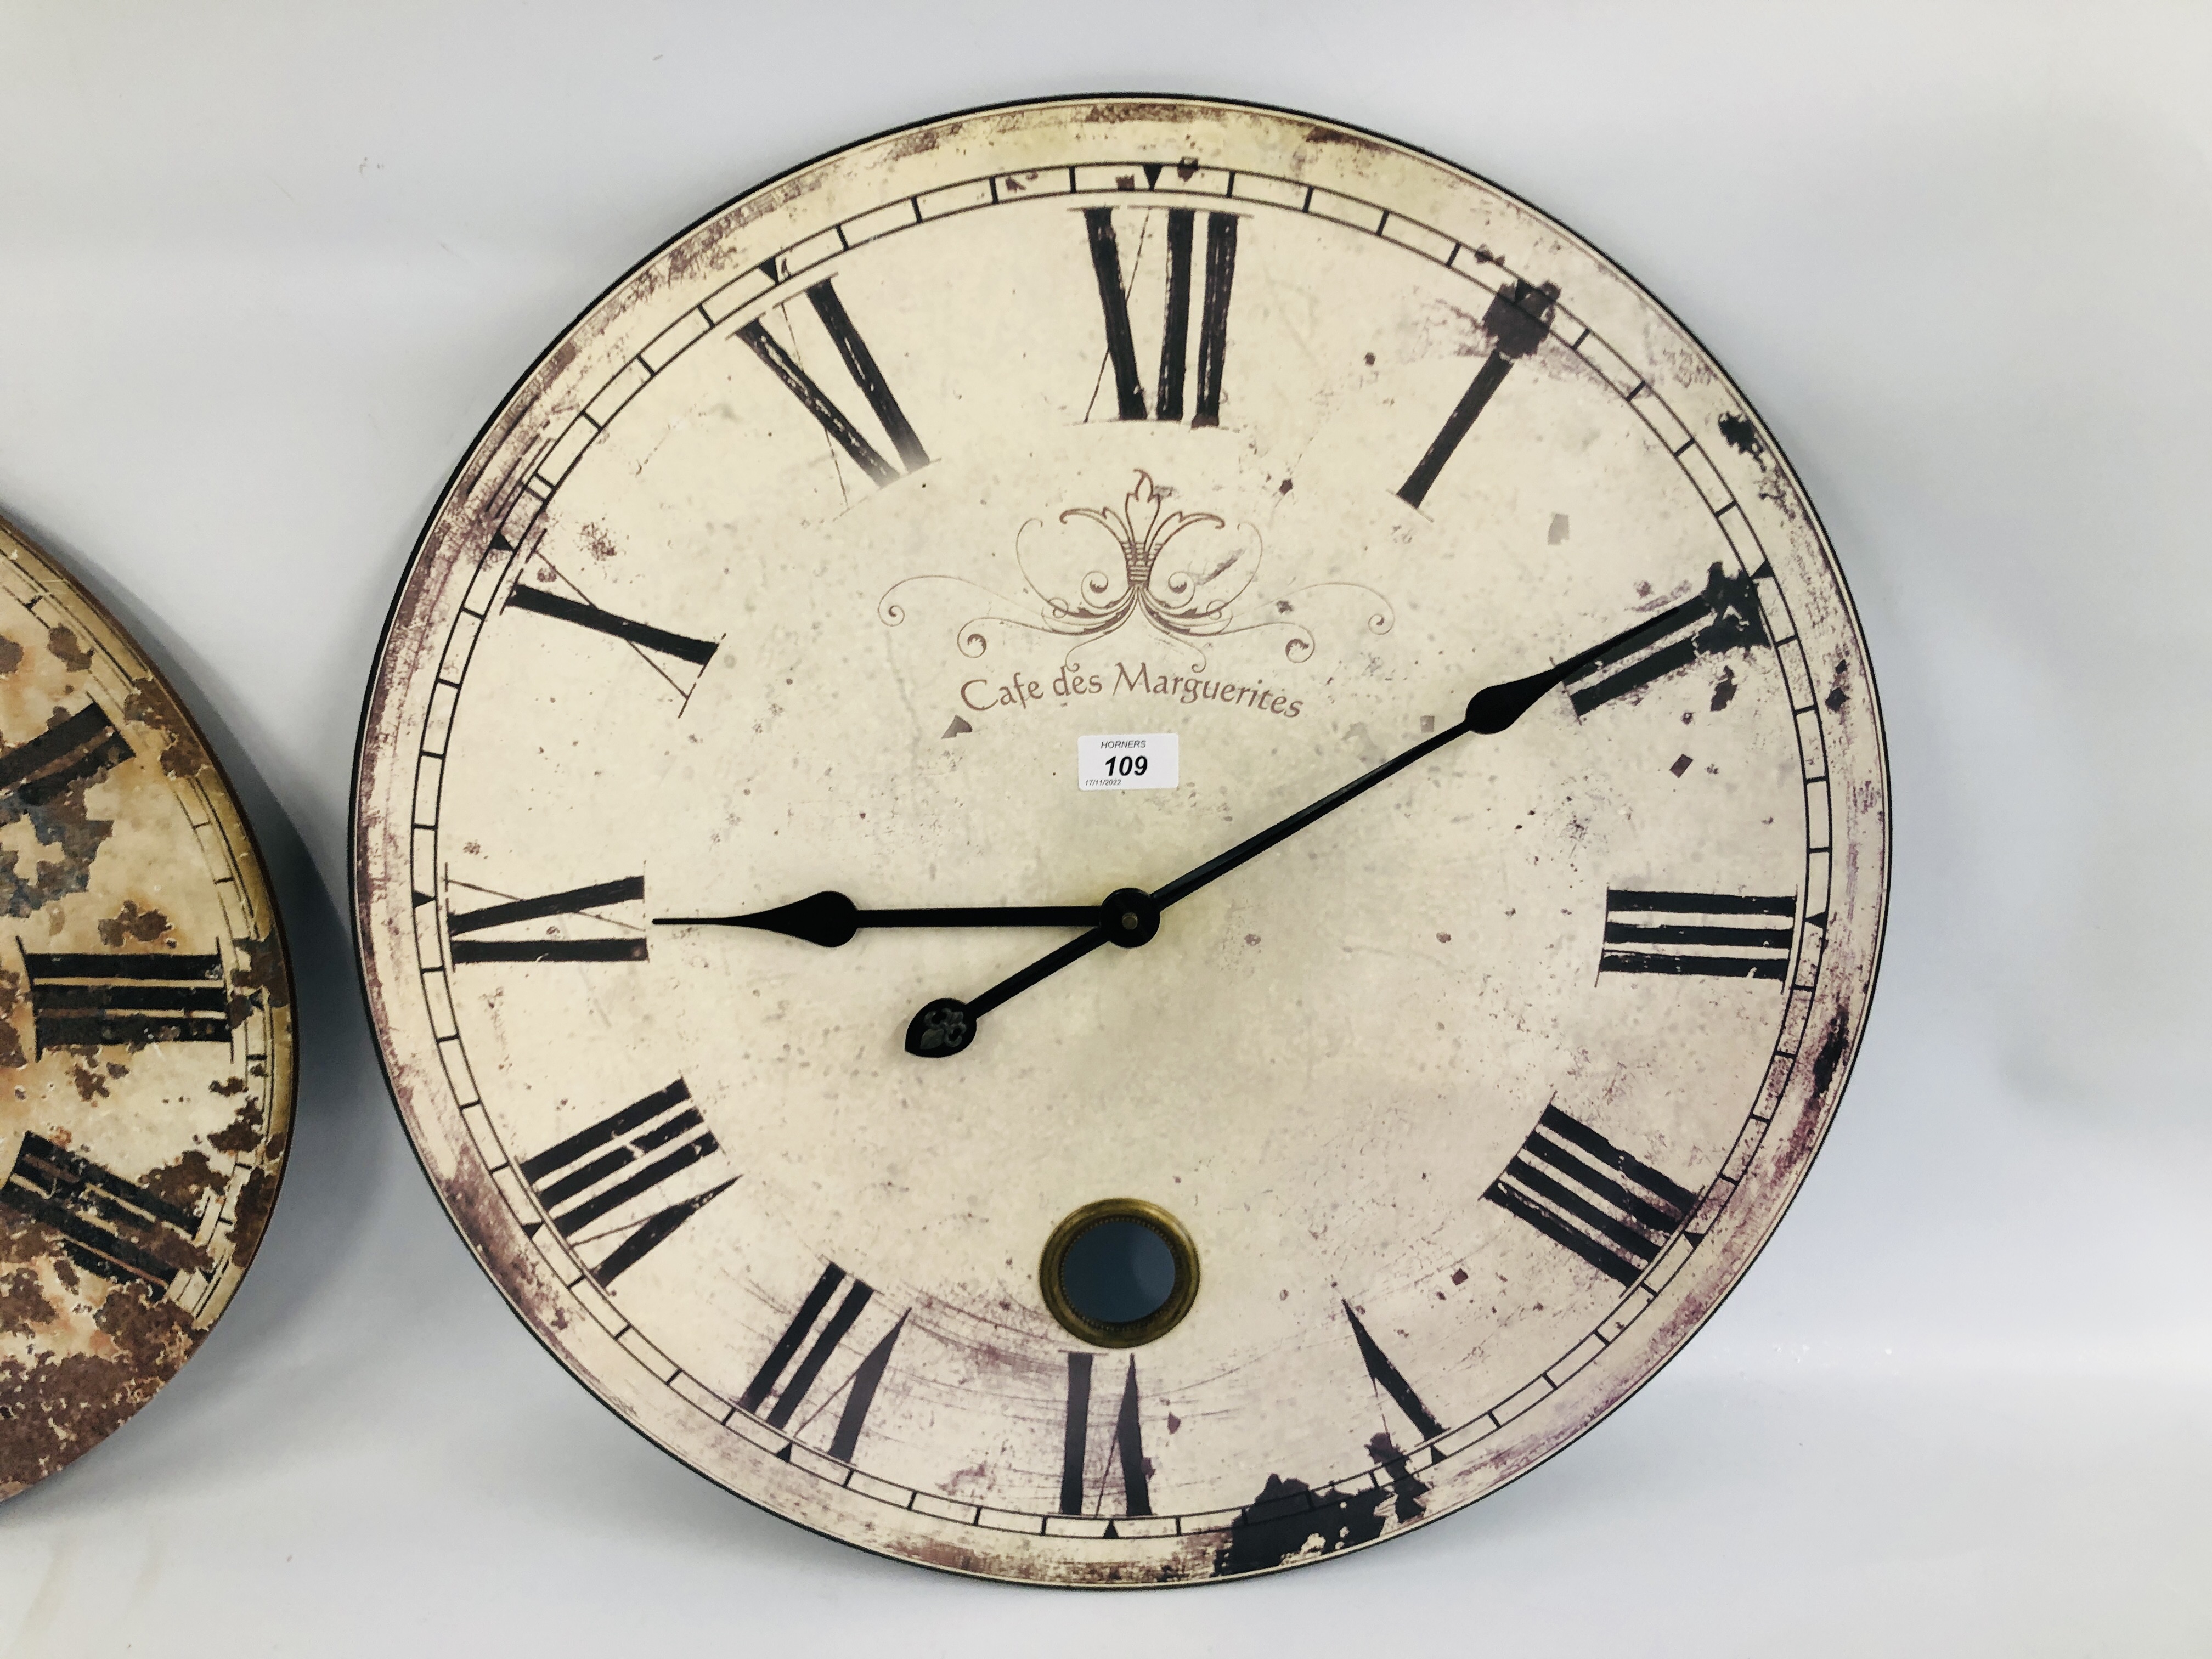 TWO REPRODUCTION WALL CLOCKS WITH QUARTZ MOVEMENTS ONE MARKED "CAFE DES MARGUERITES" DIAMETER 59CM. - Image 2 of 5